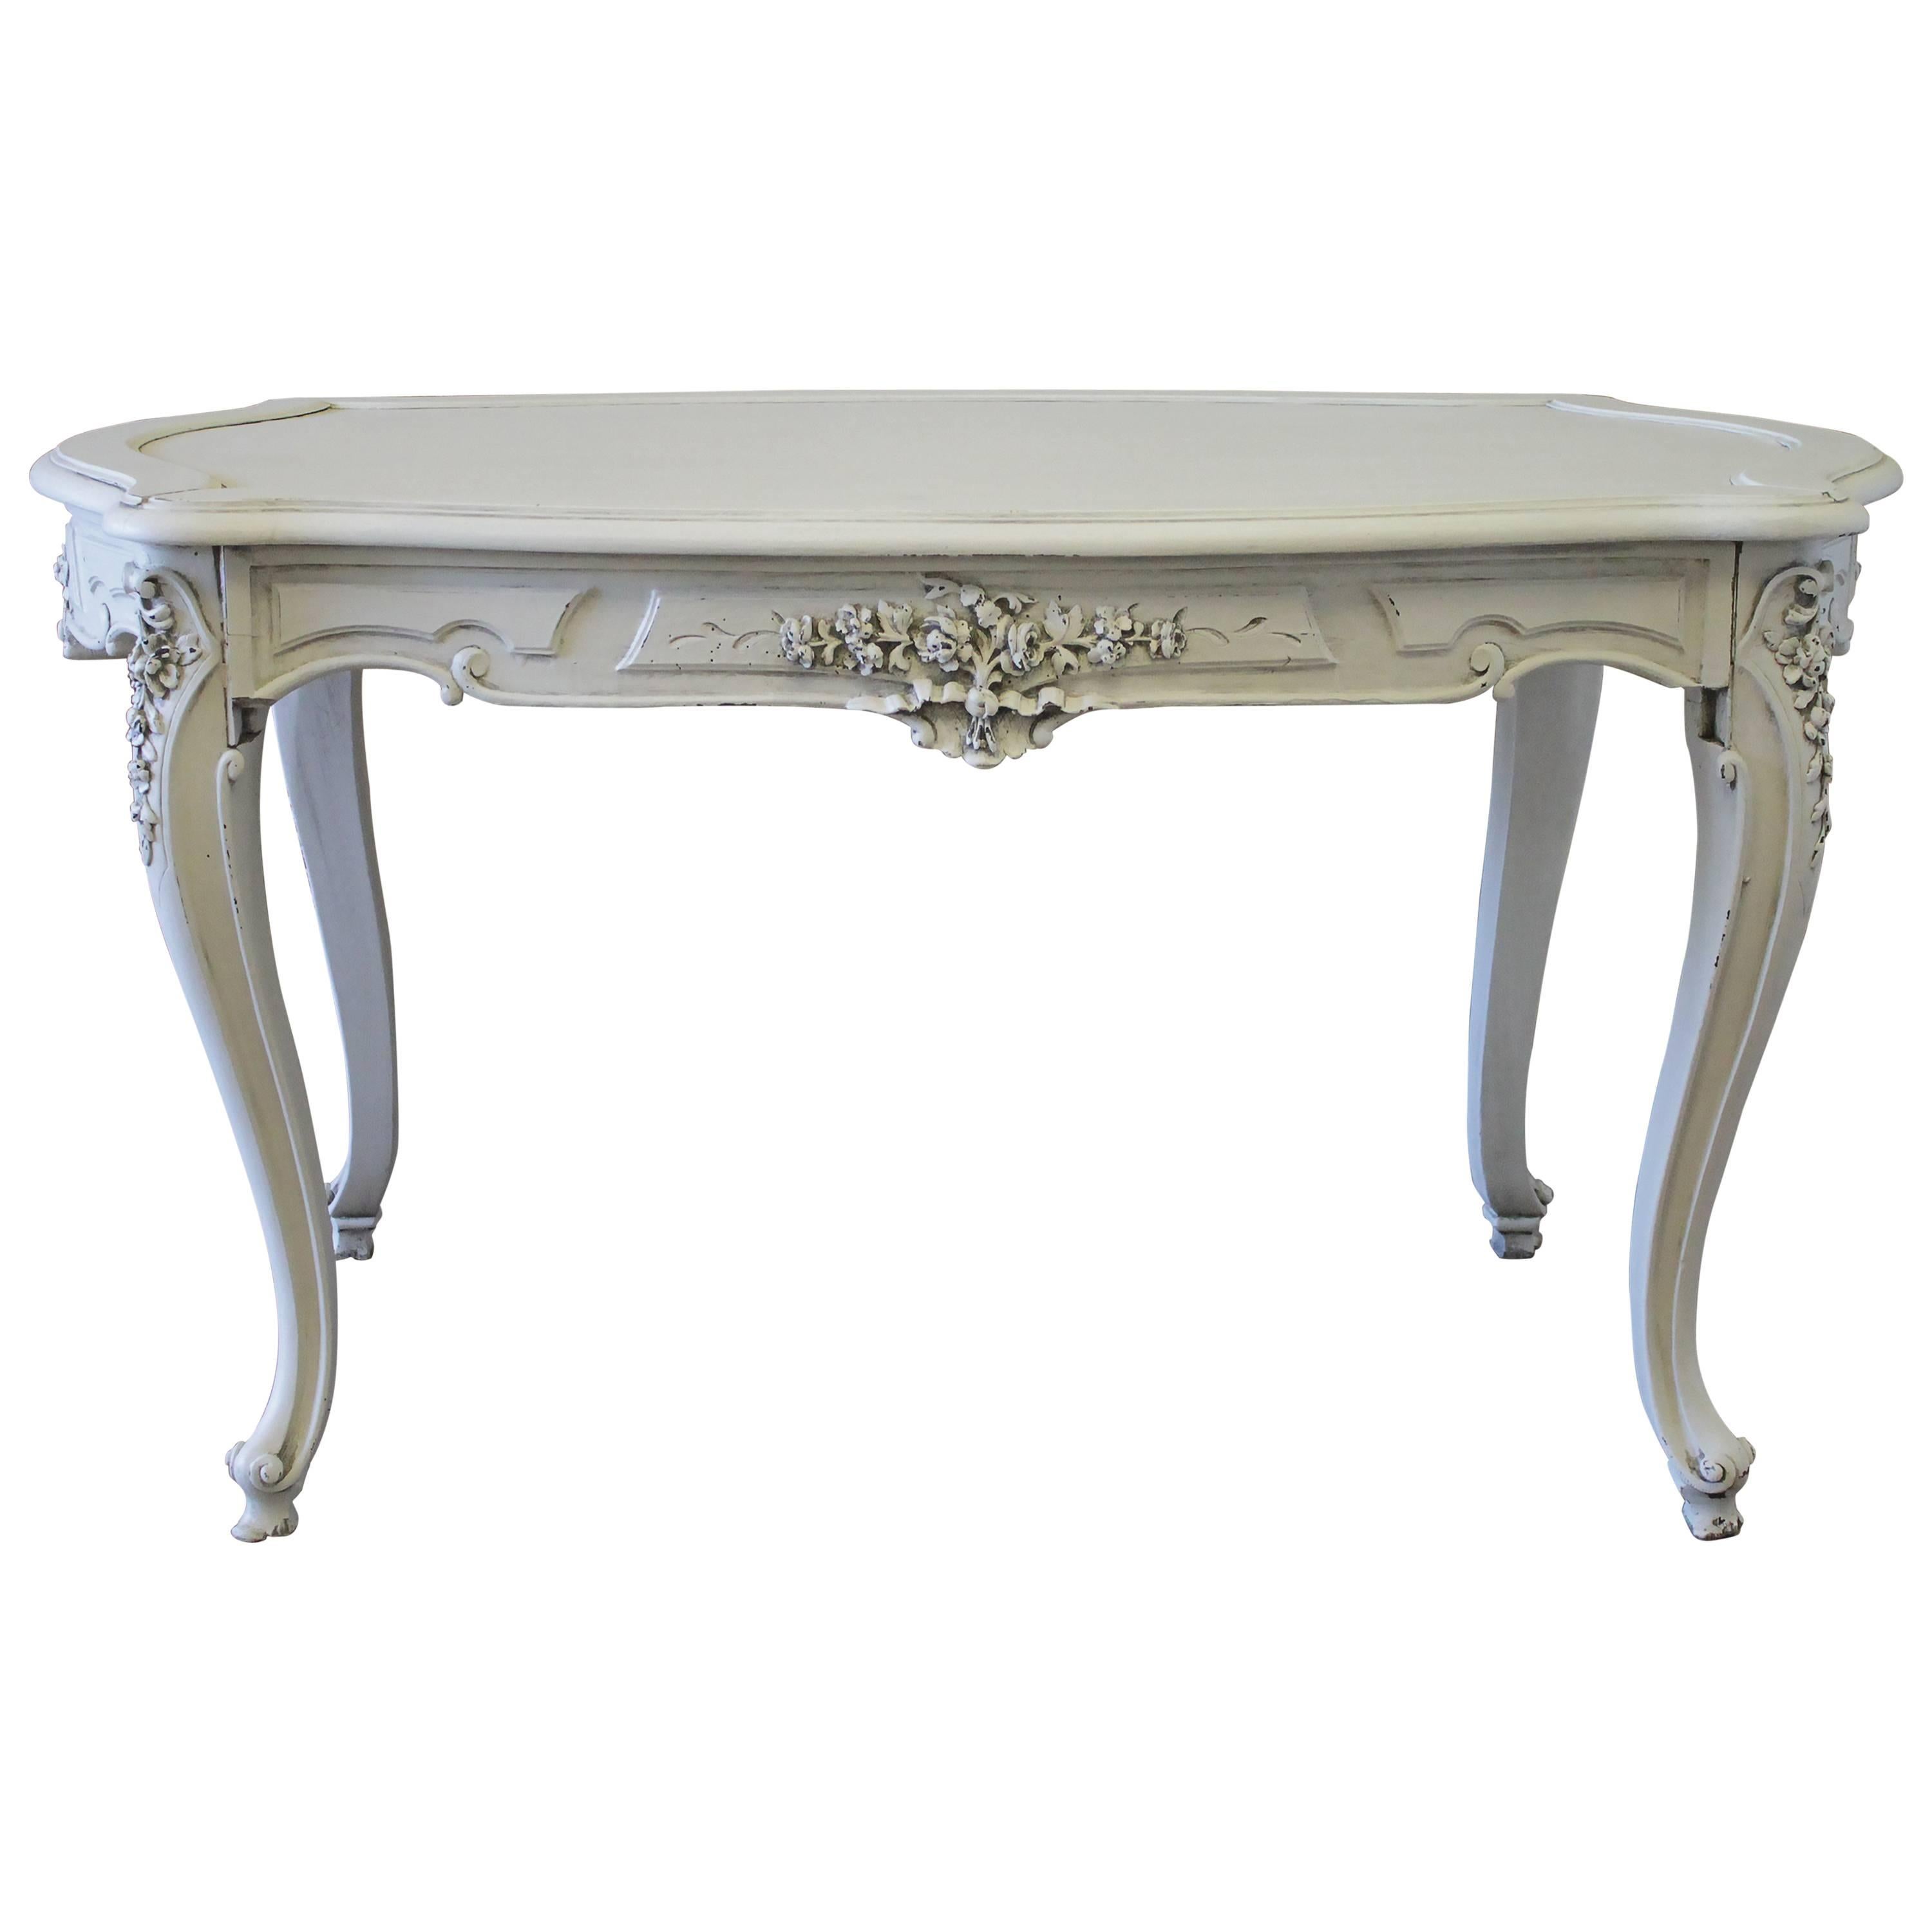 Early 20th Century Painted French Louis XV Style Carved Salon Table Desk